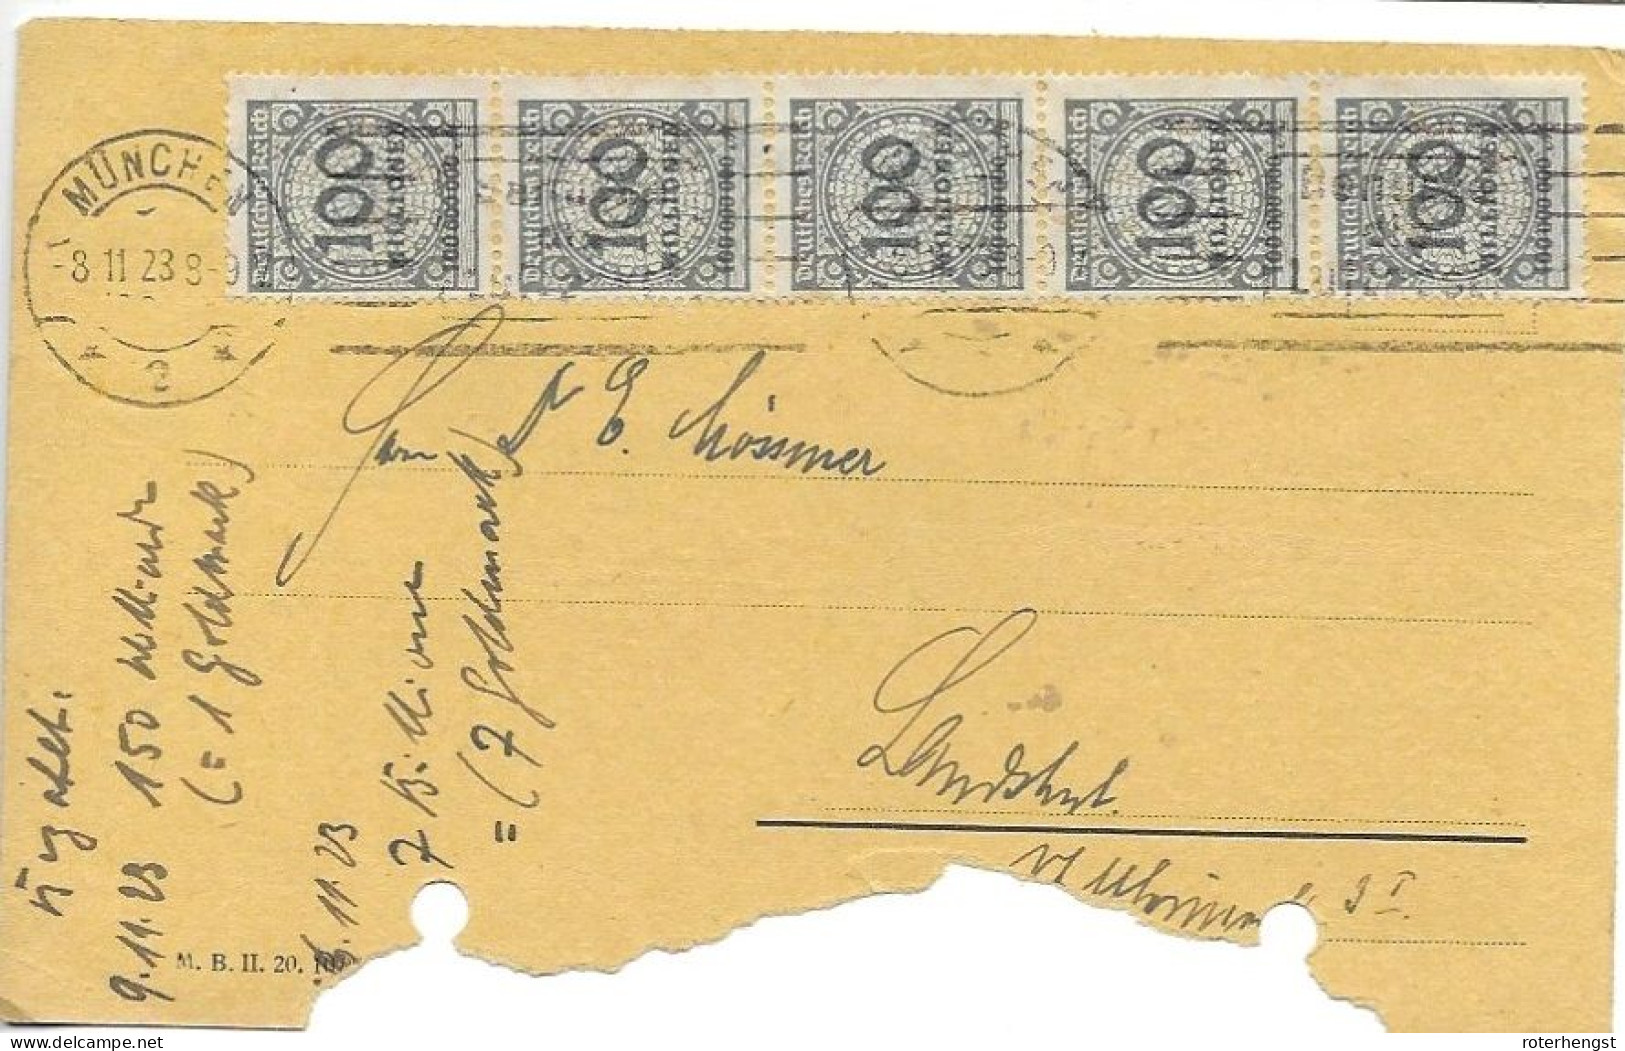 Germany Infla Card Damaged Muenchen 8.11.1923 11,5 Euros - Lettres & Documents